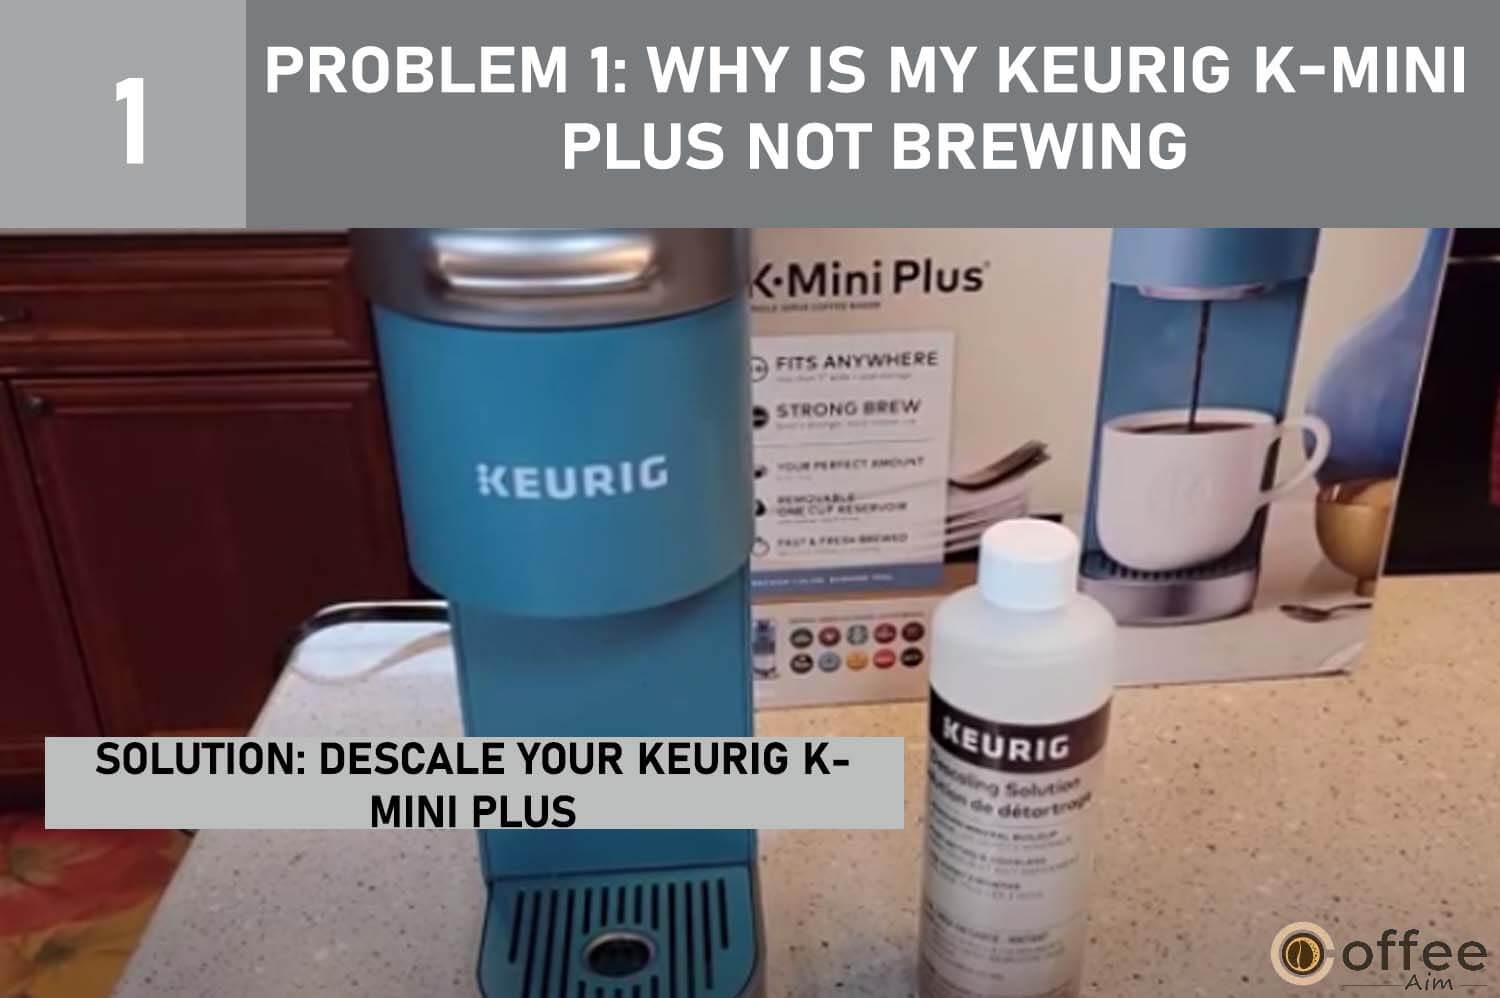 This image provides instructions on "Descaling Your Keurig K-Mini Plus" as part of addressing Problem 1: "Why Is My Keurig K-Mini Plus Not Brewing?" in our "Keurig K-Mini Plus Problems" article.





